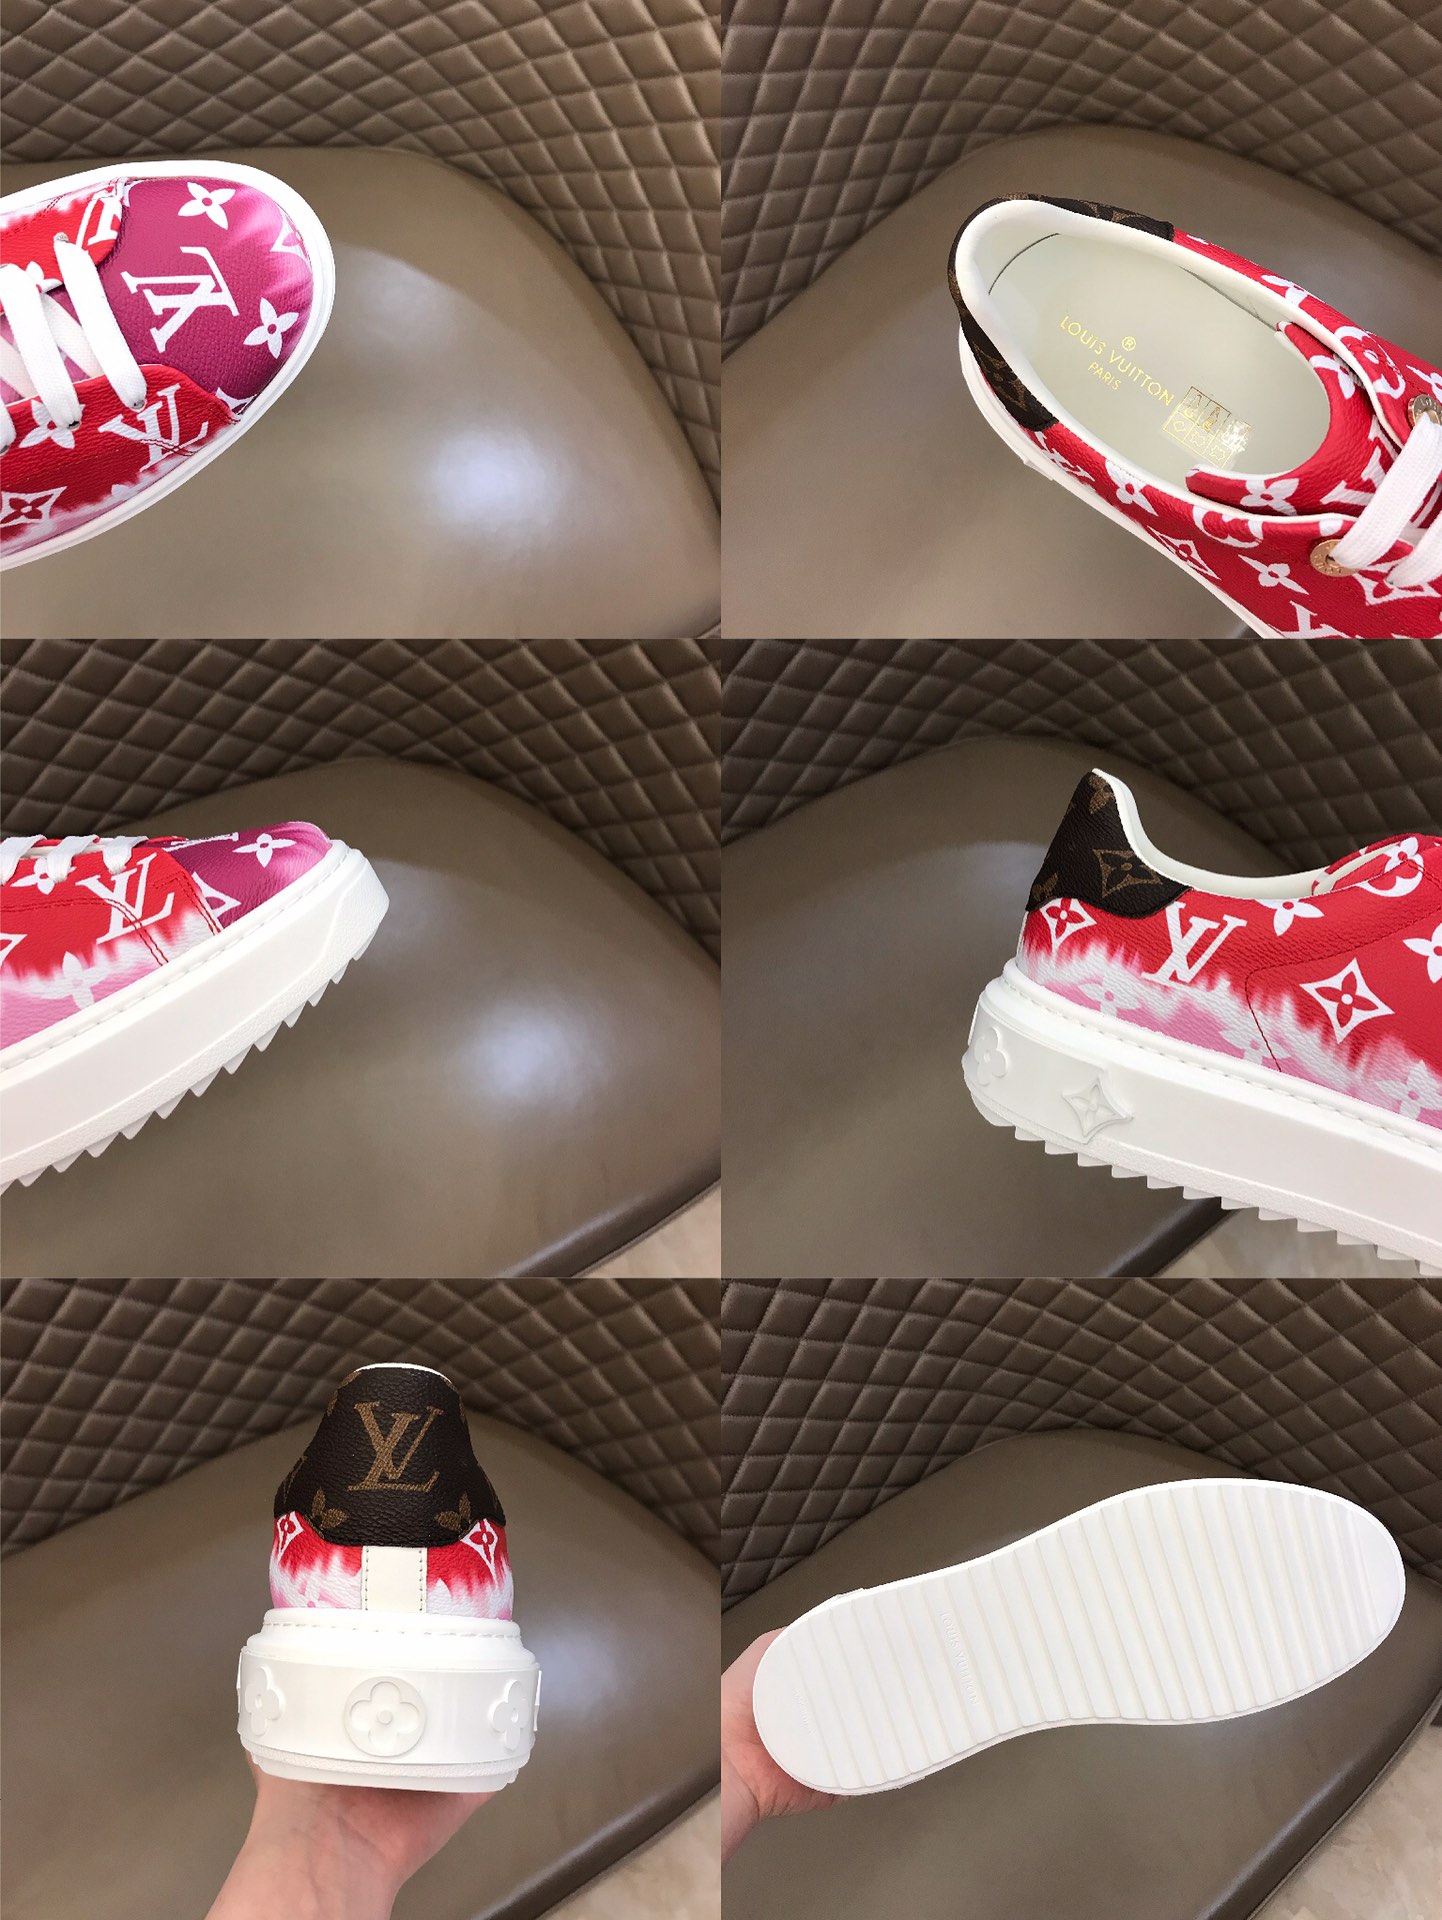 lv Sneaker Luxembourg in Red